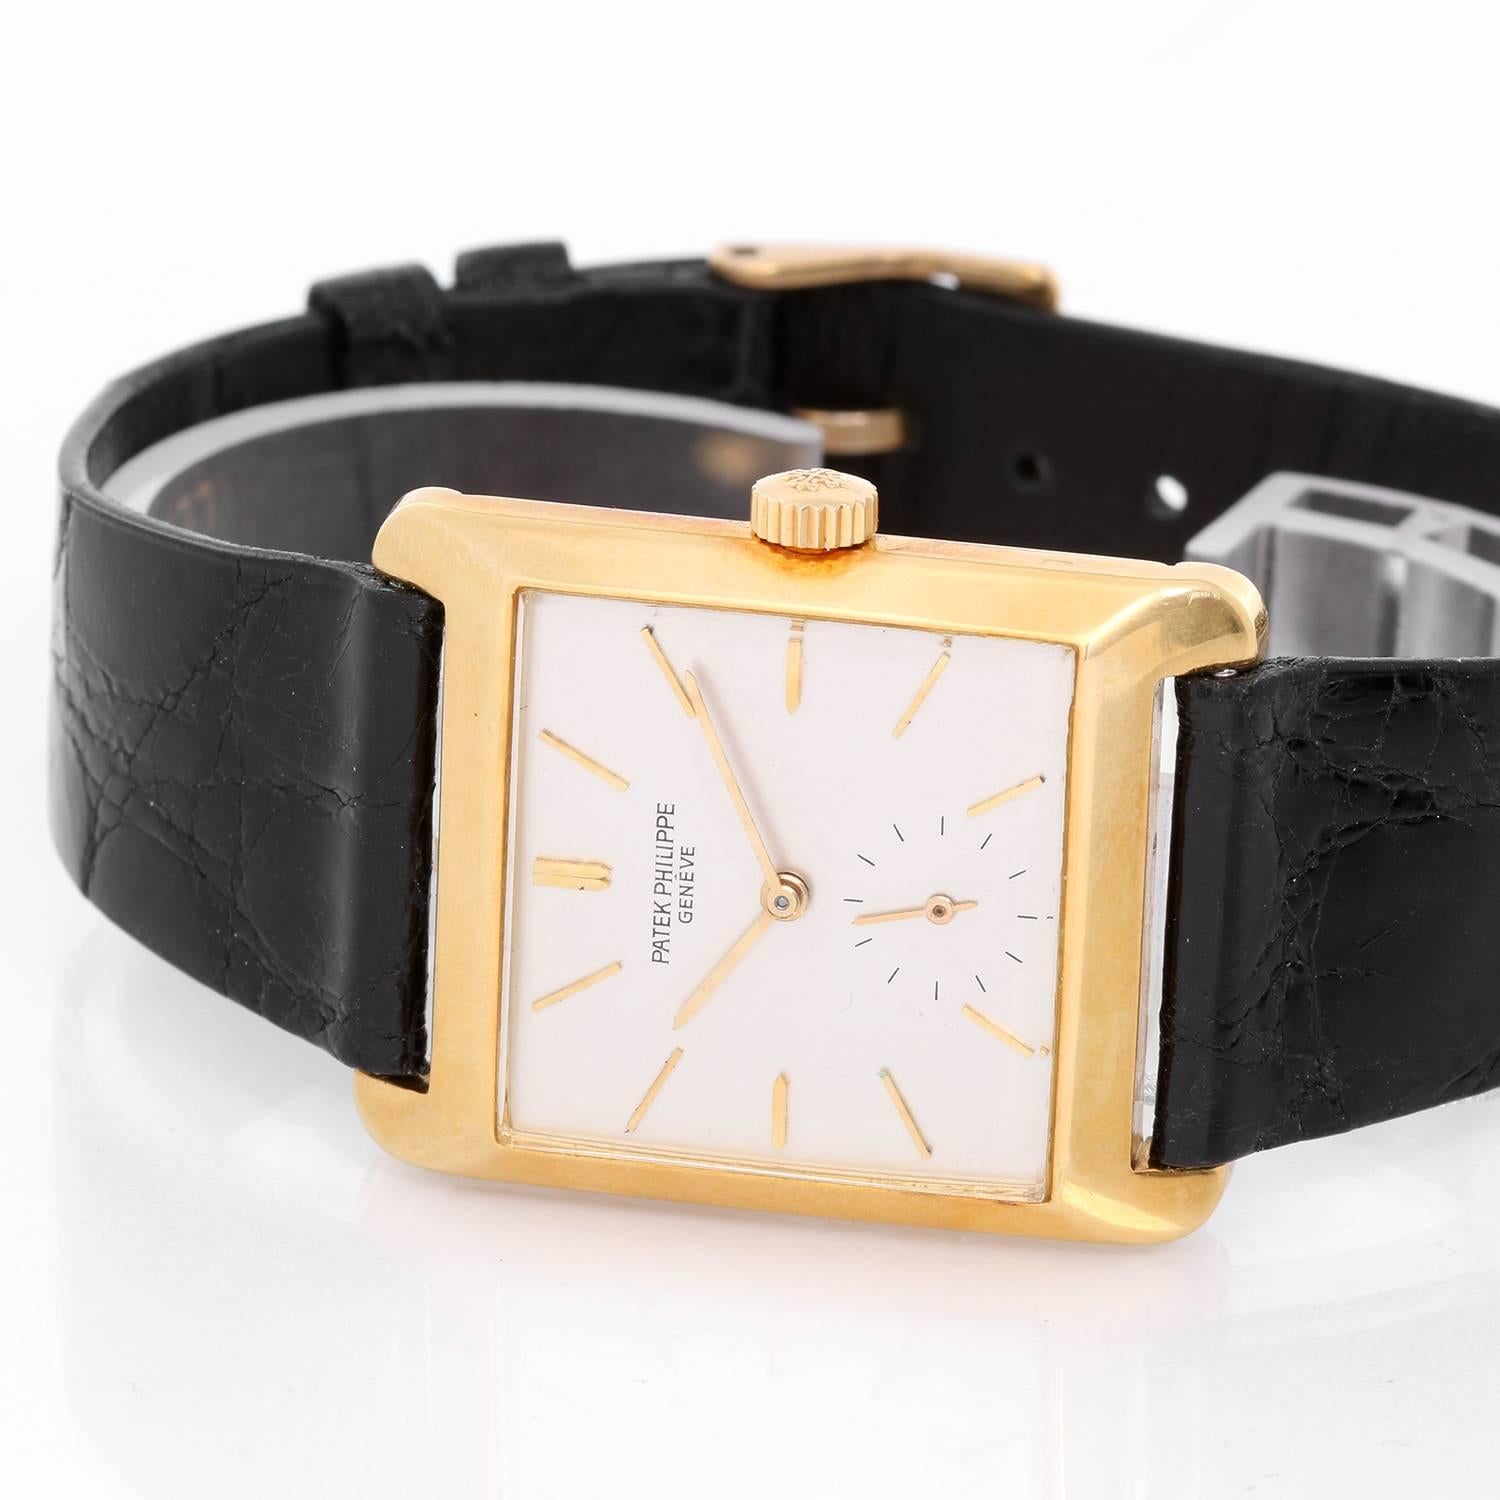 Vintage Patek Philippe & Co. 18K Yellow Gold Watch Ref 2488 -  Automatic winding. 18k Yellow Gold Case (28x35mm). Silvered dial with raised stick hour markers; subsecond at 6 o'clock. Black strap band with gold tone buckle. Pre-owned vintage.